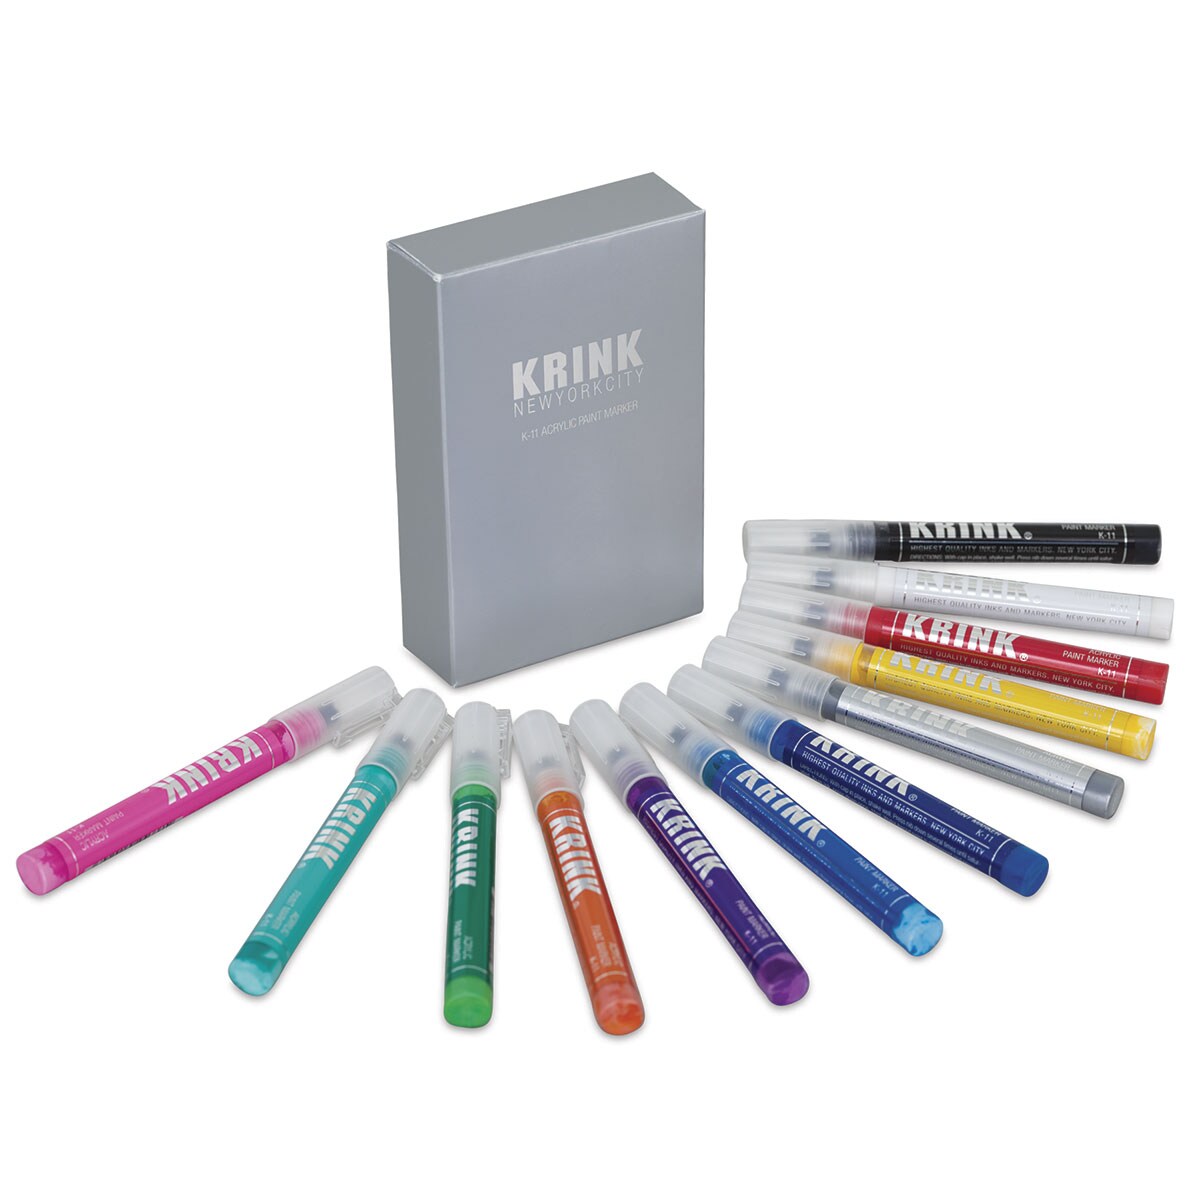 Krink K-11 Acrylic Paint Markers - Set of 12, Assorted Colors